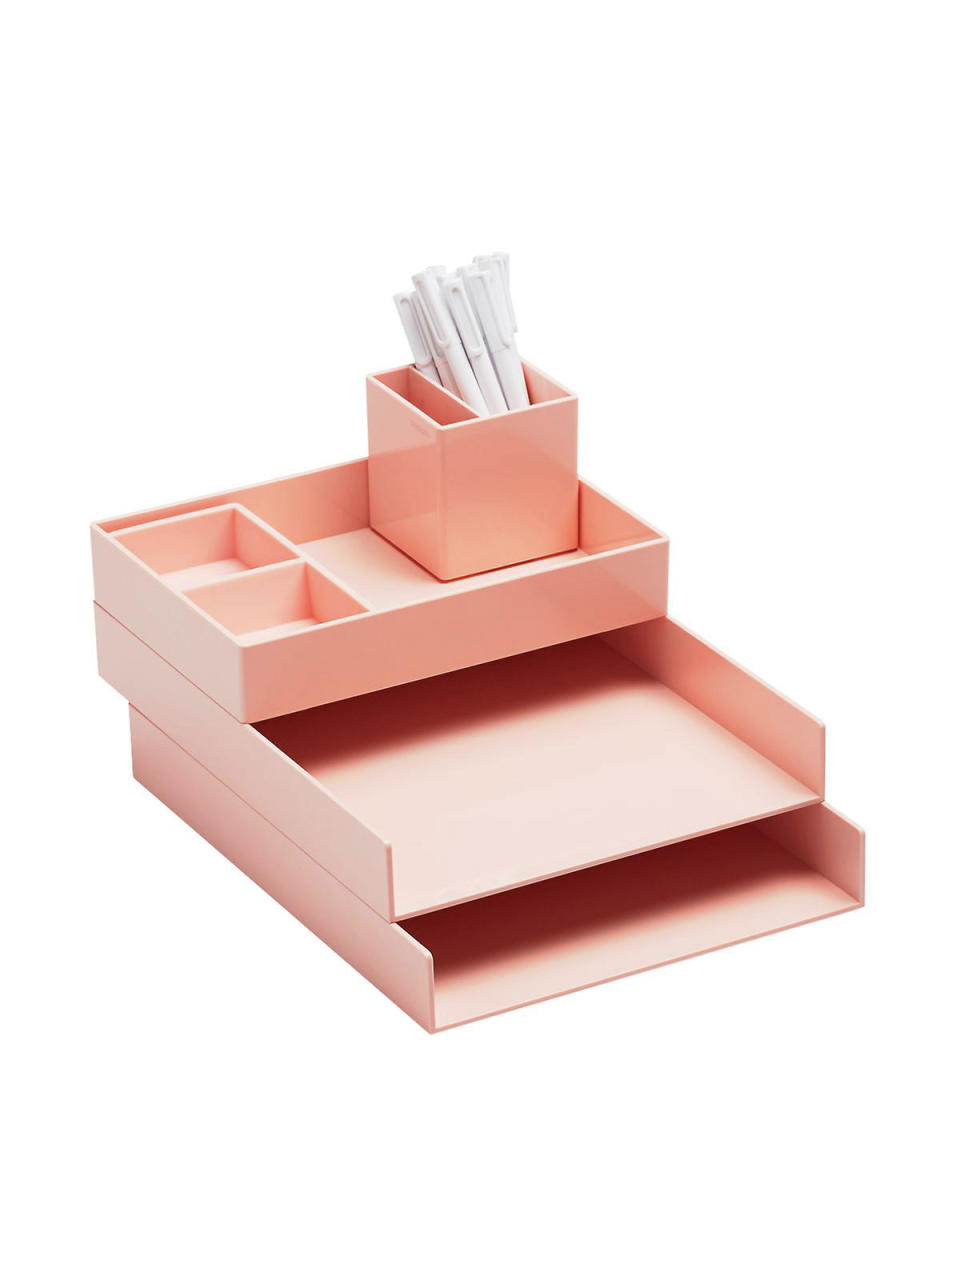 Best Desk Organizer for Those Who Love Color Coordination